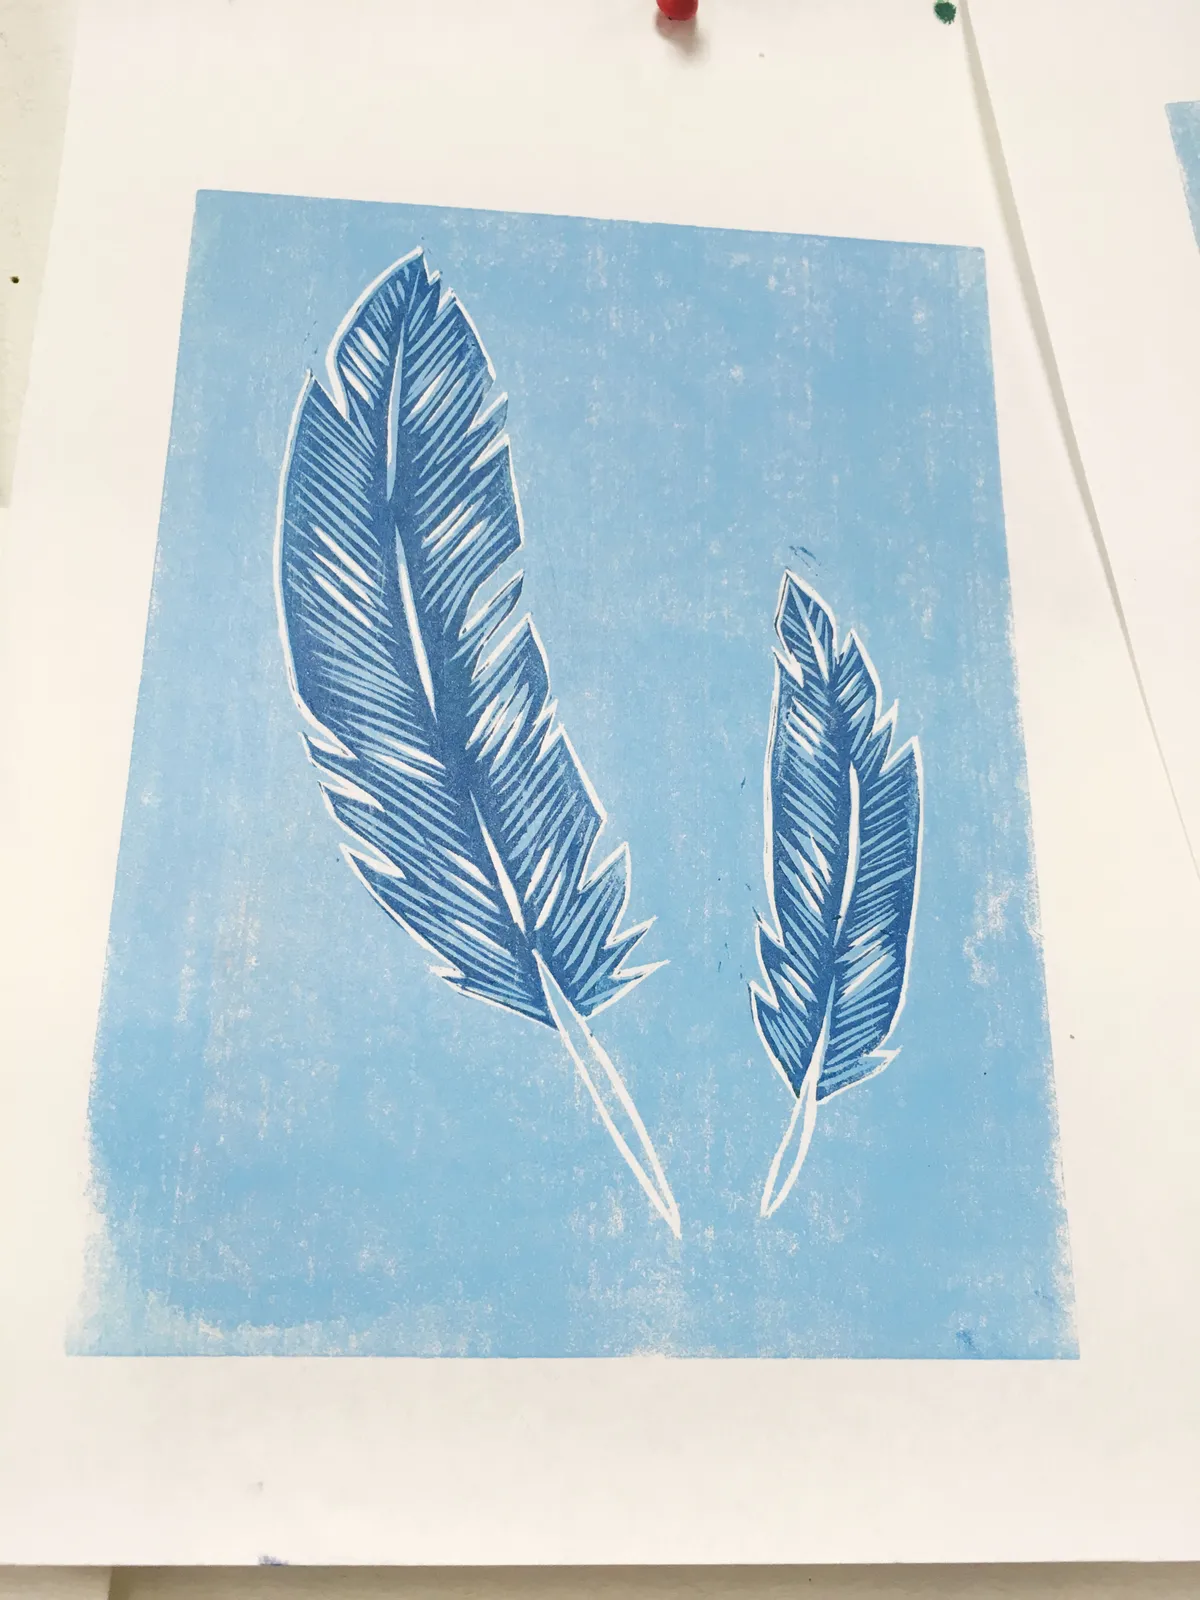 A feather reduction print